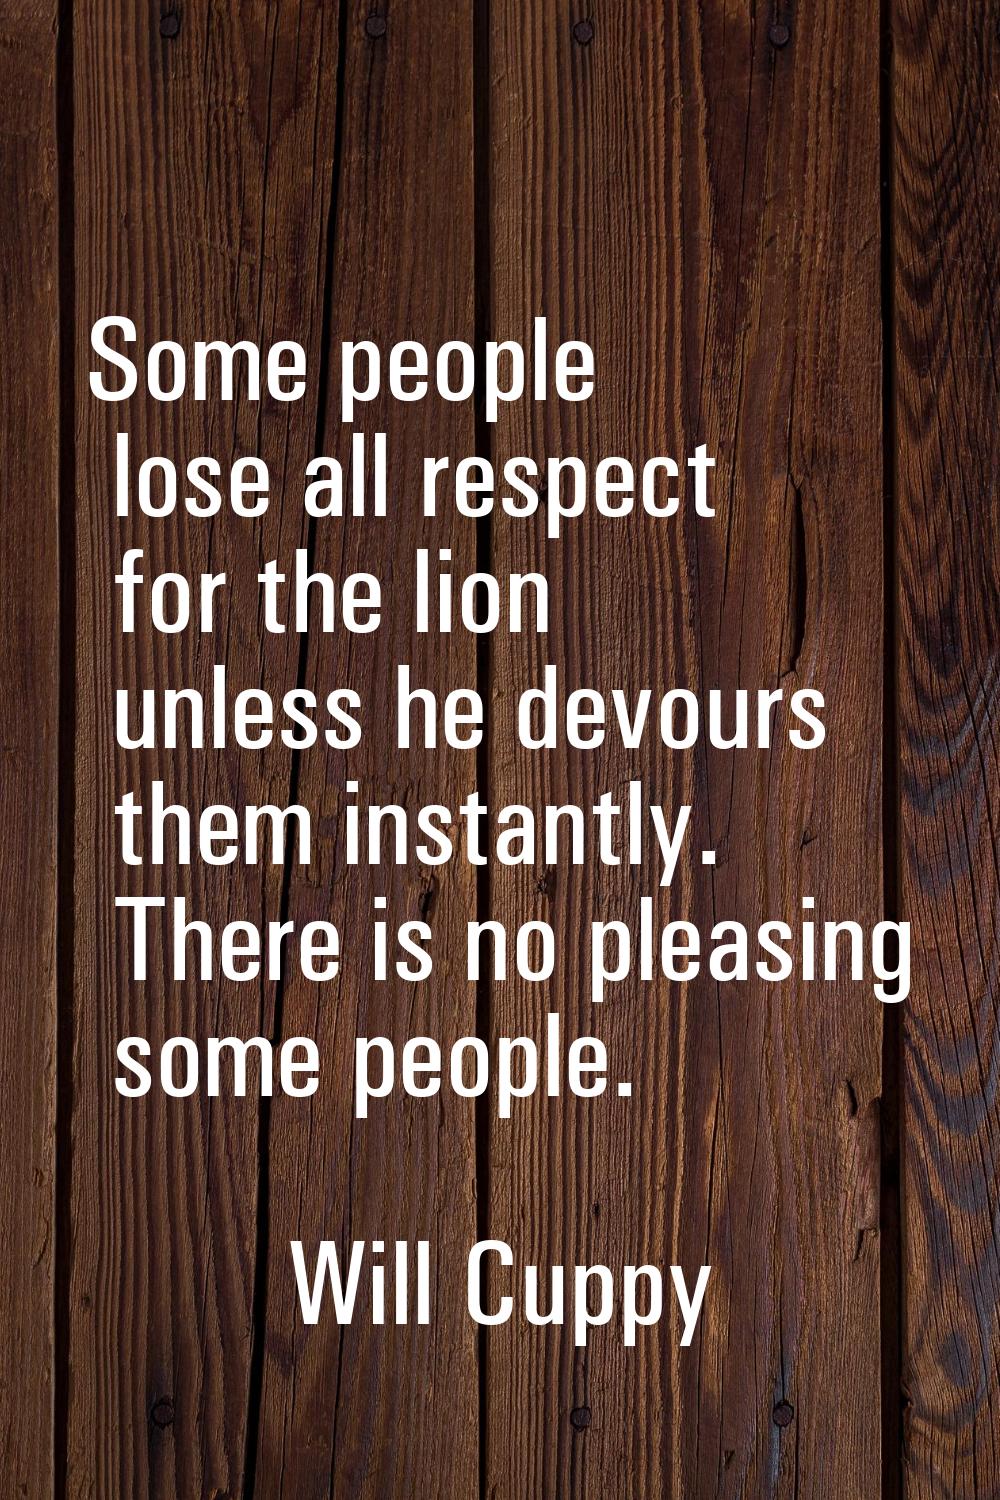 Some people lose all respect for the lion unless he devours them instantly. There is no pleasing so